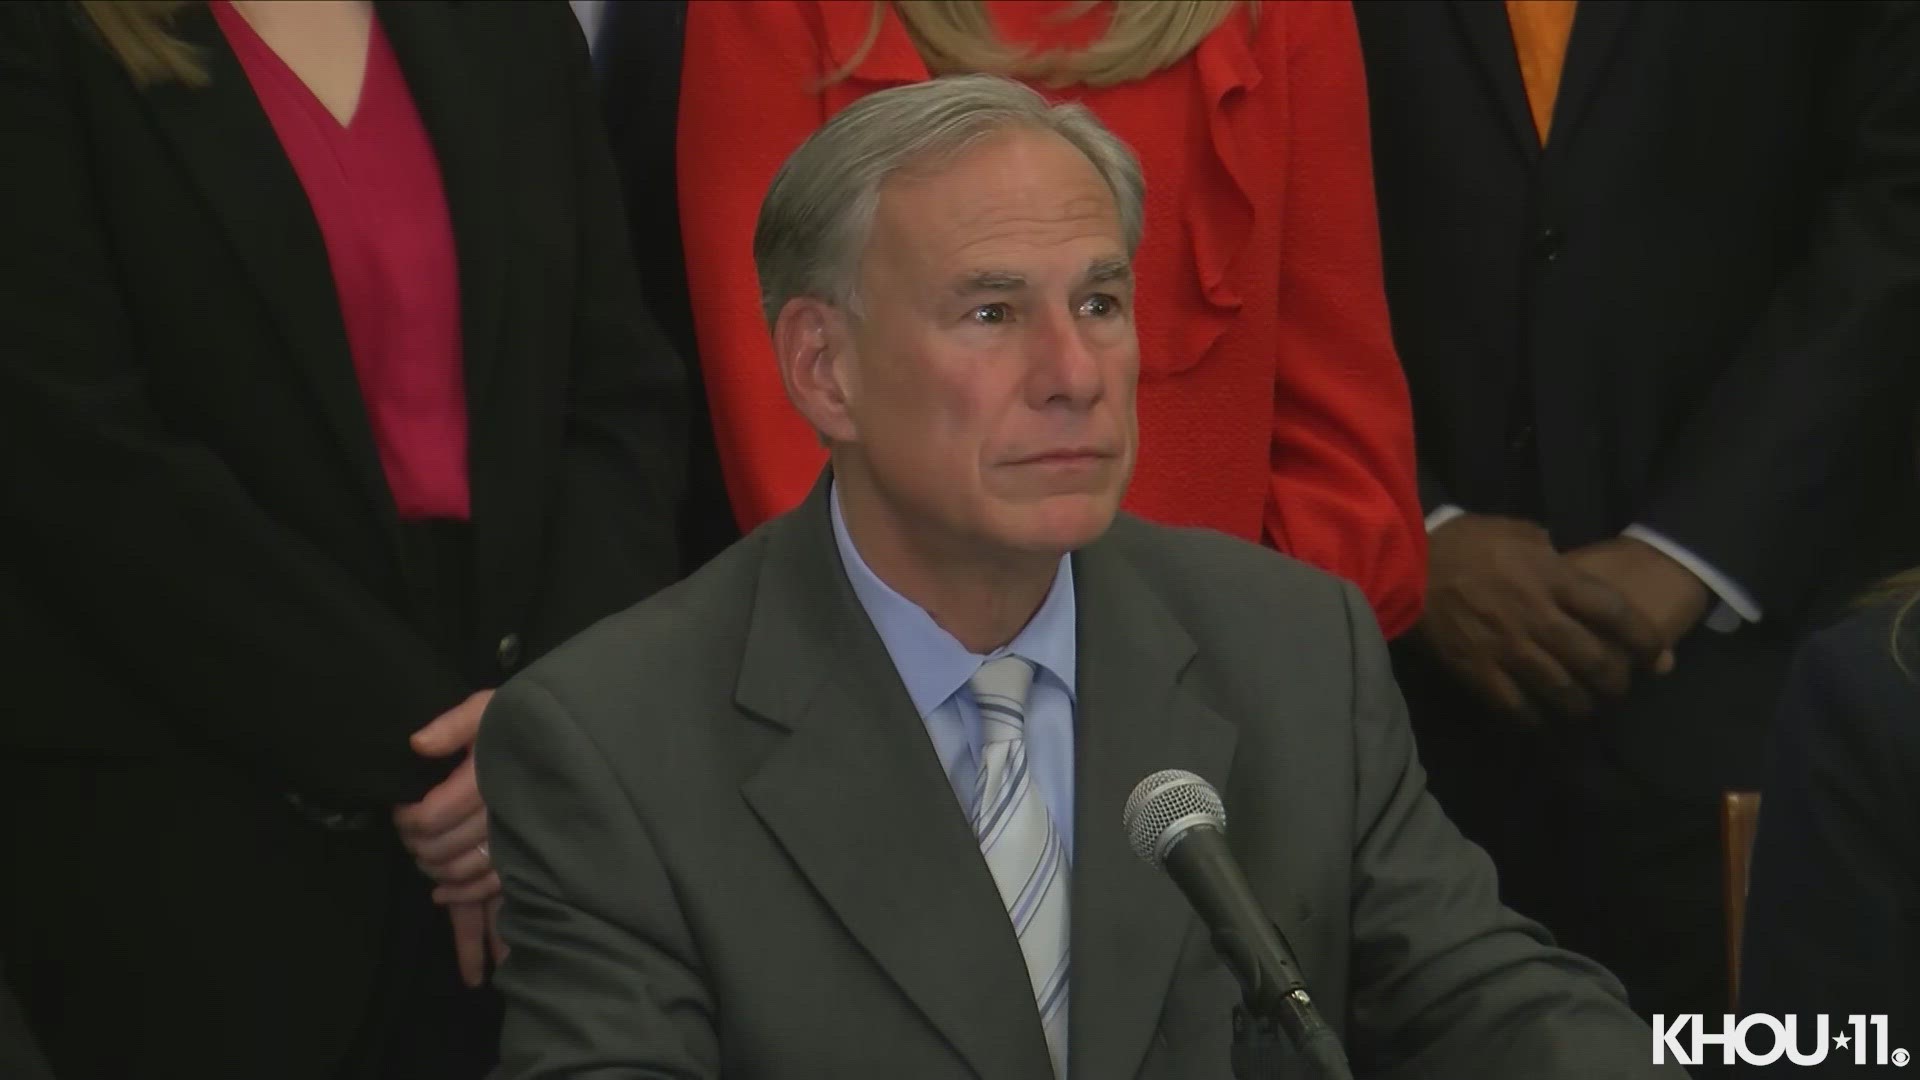 Gov. Abbott called the TEA takeover of HISD "unfortunate" and said all Texans should come together to reinvent the district so it could provide quality education.